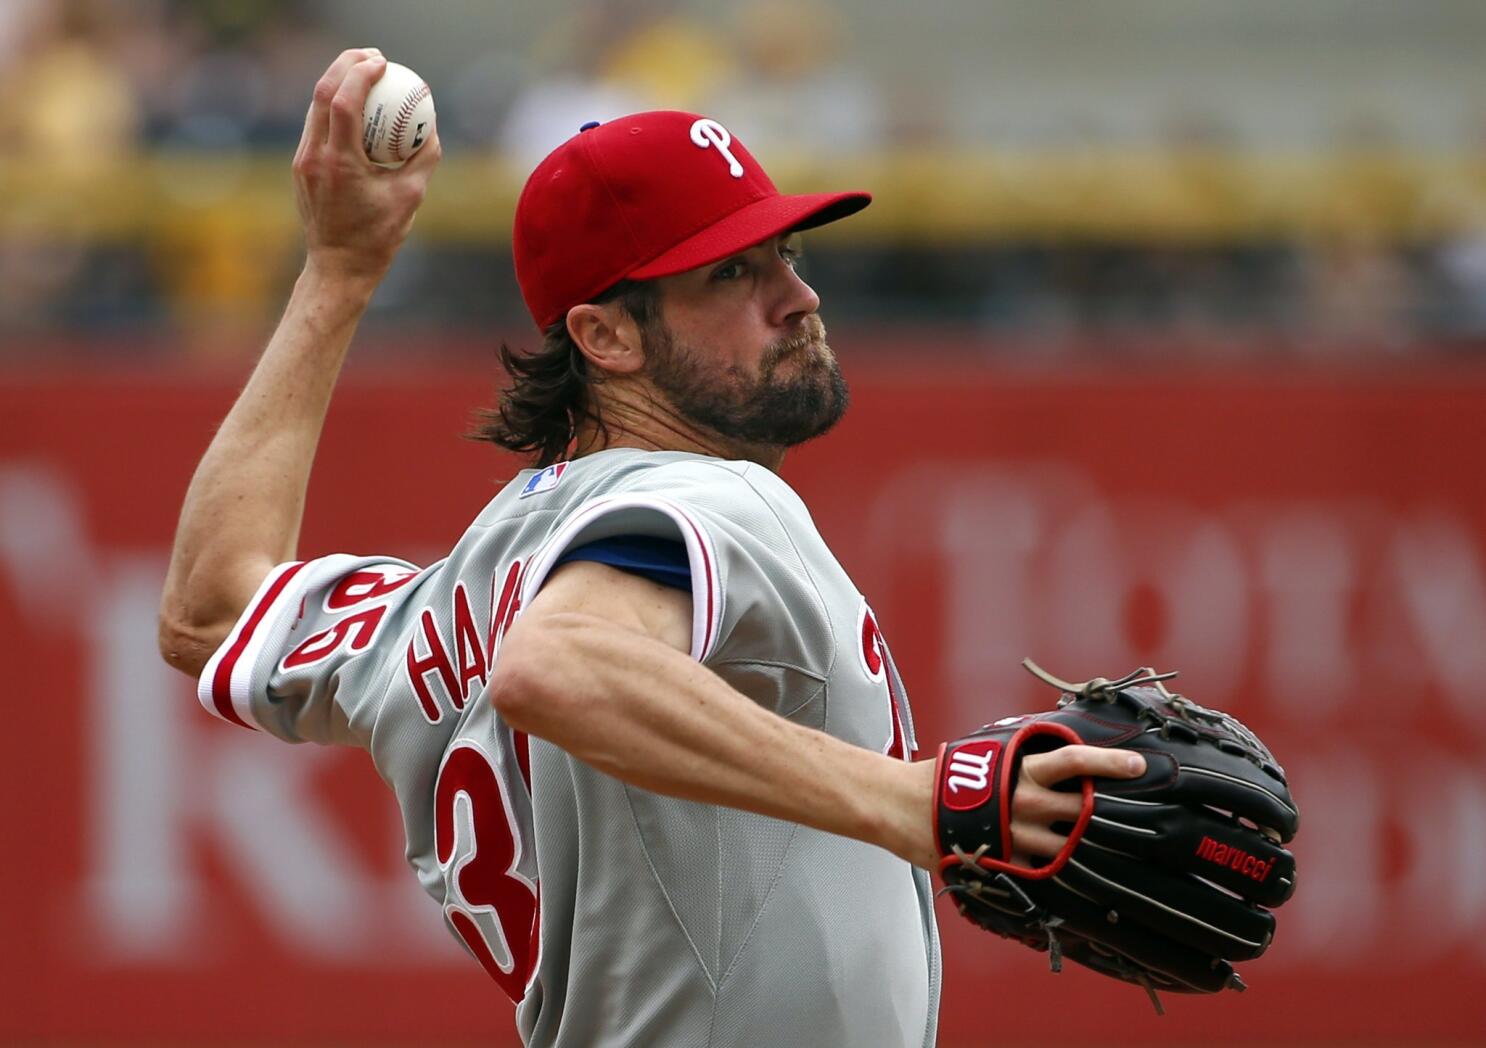 The Phillies' Cole Hamels era apparently at an end with trade to